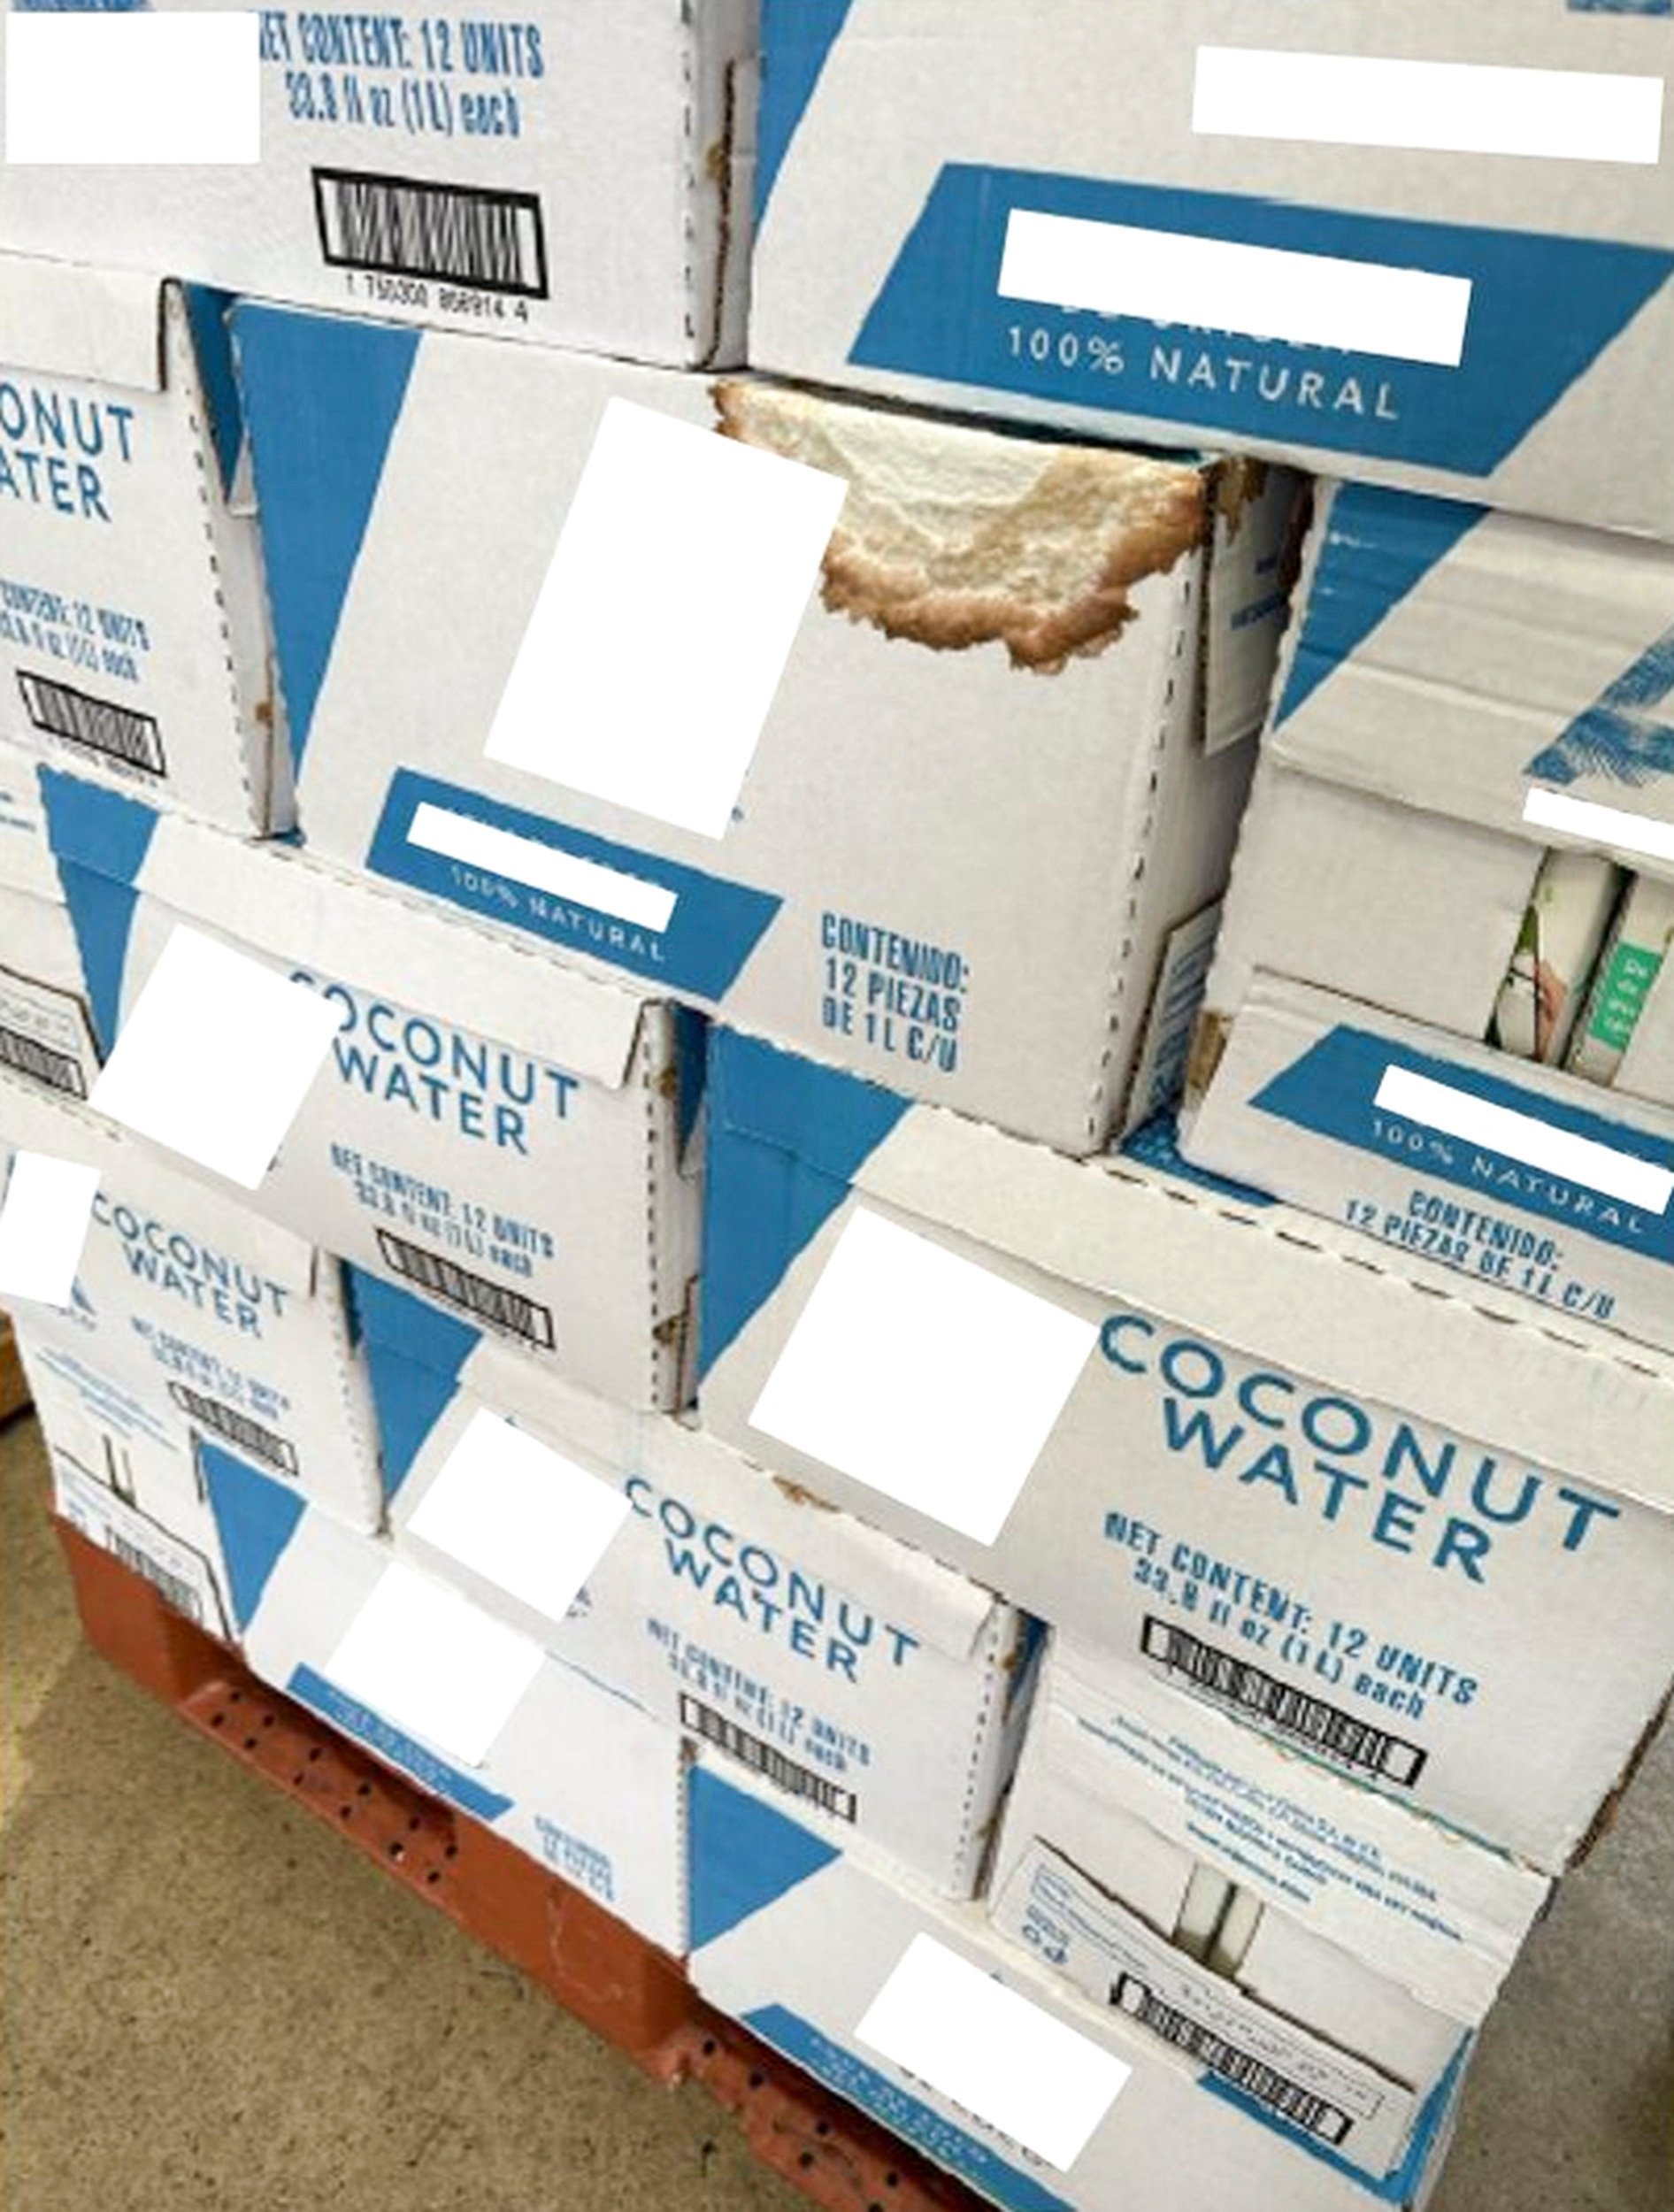 The consignment, labelled as coconut water, arrived in Hong Kong last Saturday. Photo: Handout